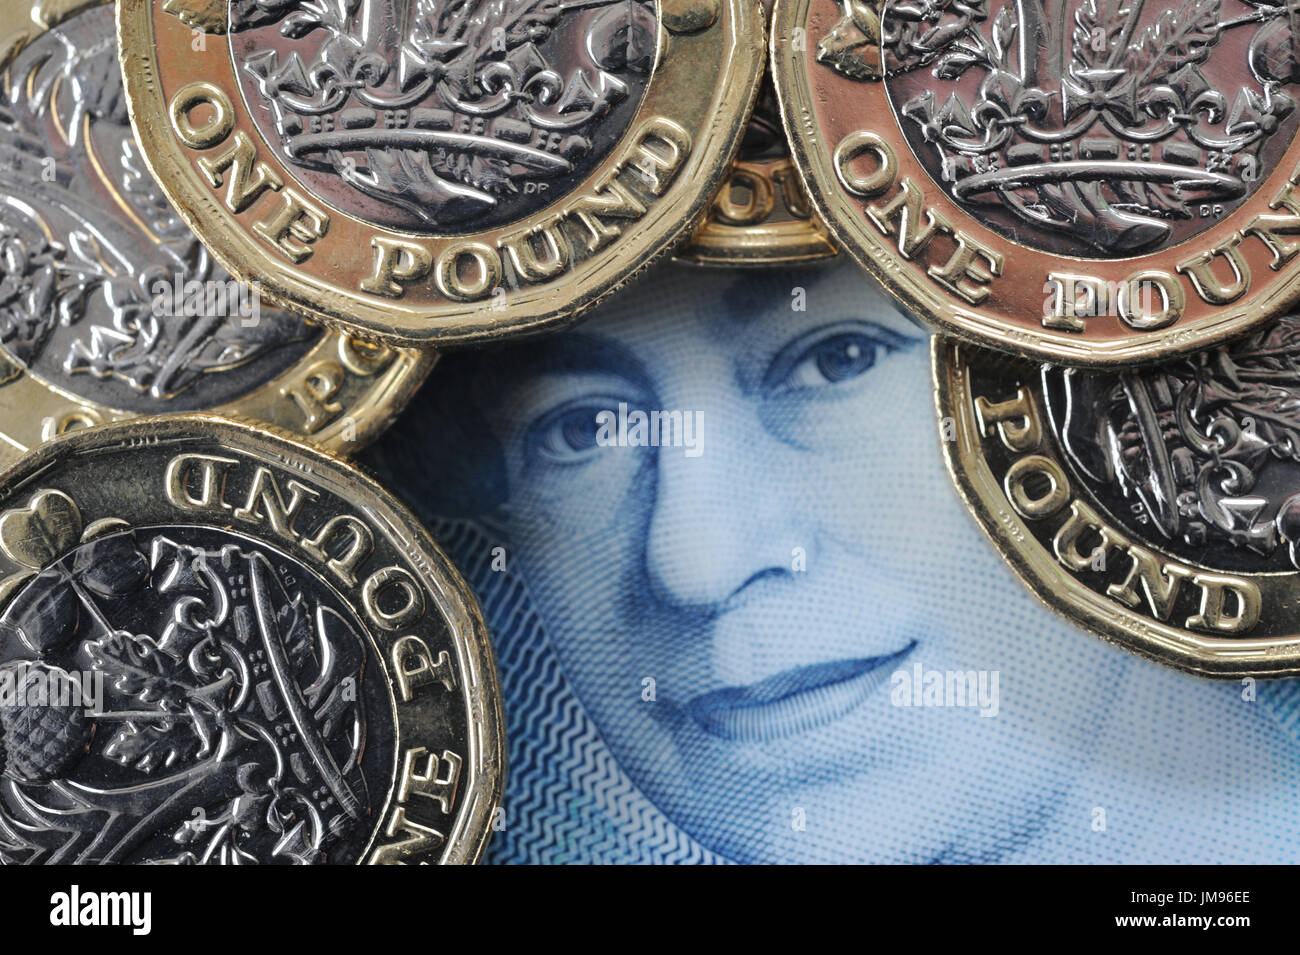 NEW ONE POUND COINS WITH QUEENS HEAD ON NEW FIVE POUND NOTE RE FINANCE BREXIT SAVERS SAVINGS HOUSEHOLD BUDGETS INFLATION INVESTMENTS MONEY WAGES UK Stock Photo